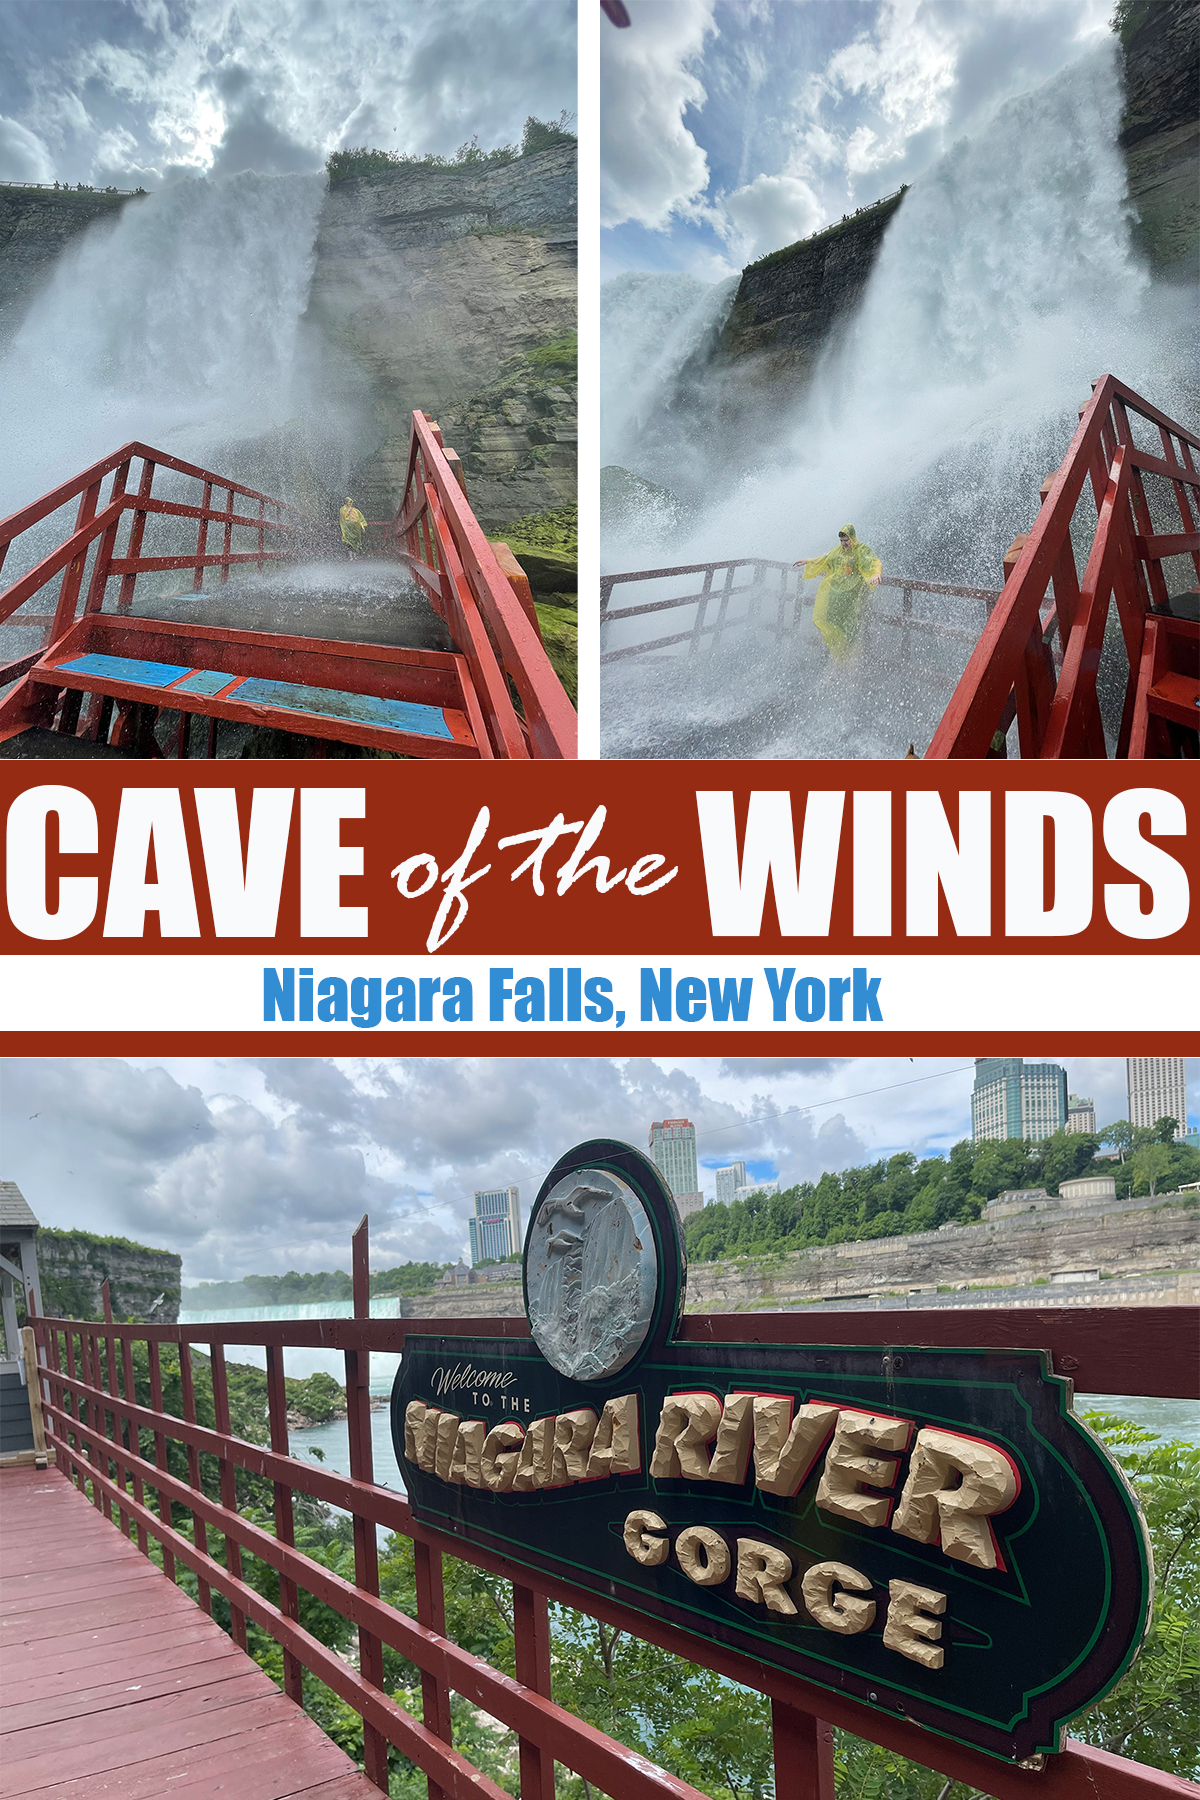 Cave of the Winds - An Exciting Experience at Niagara Falls, NY